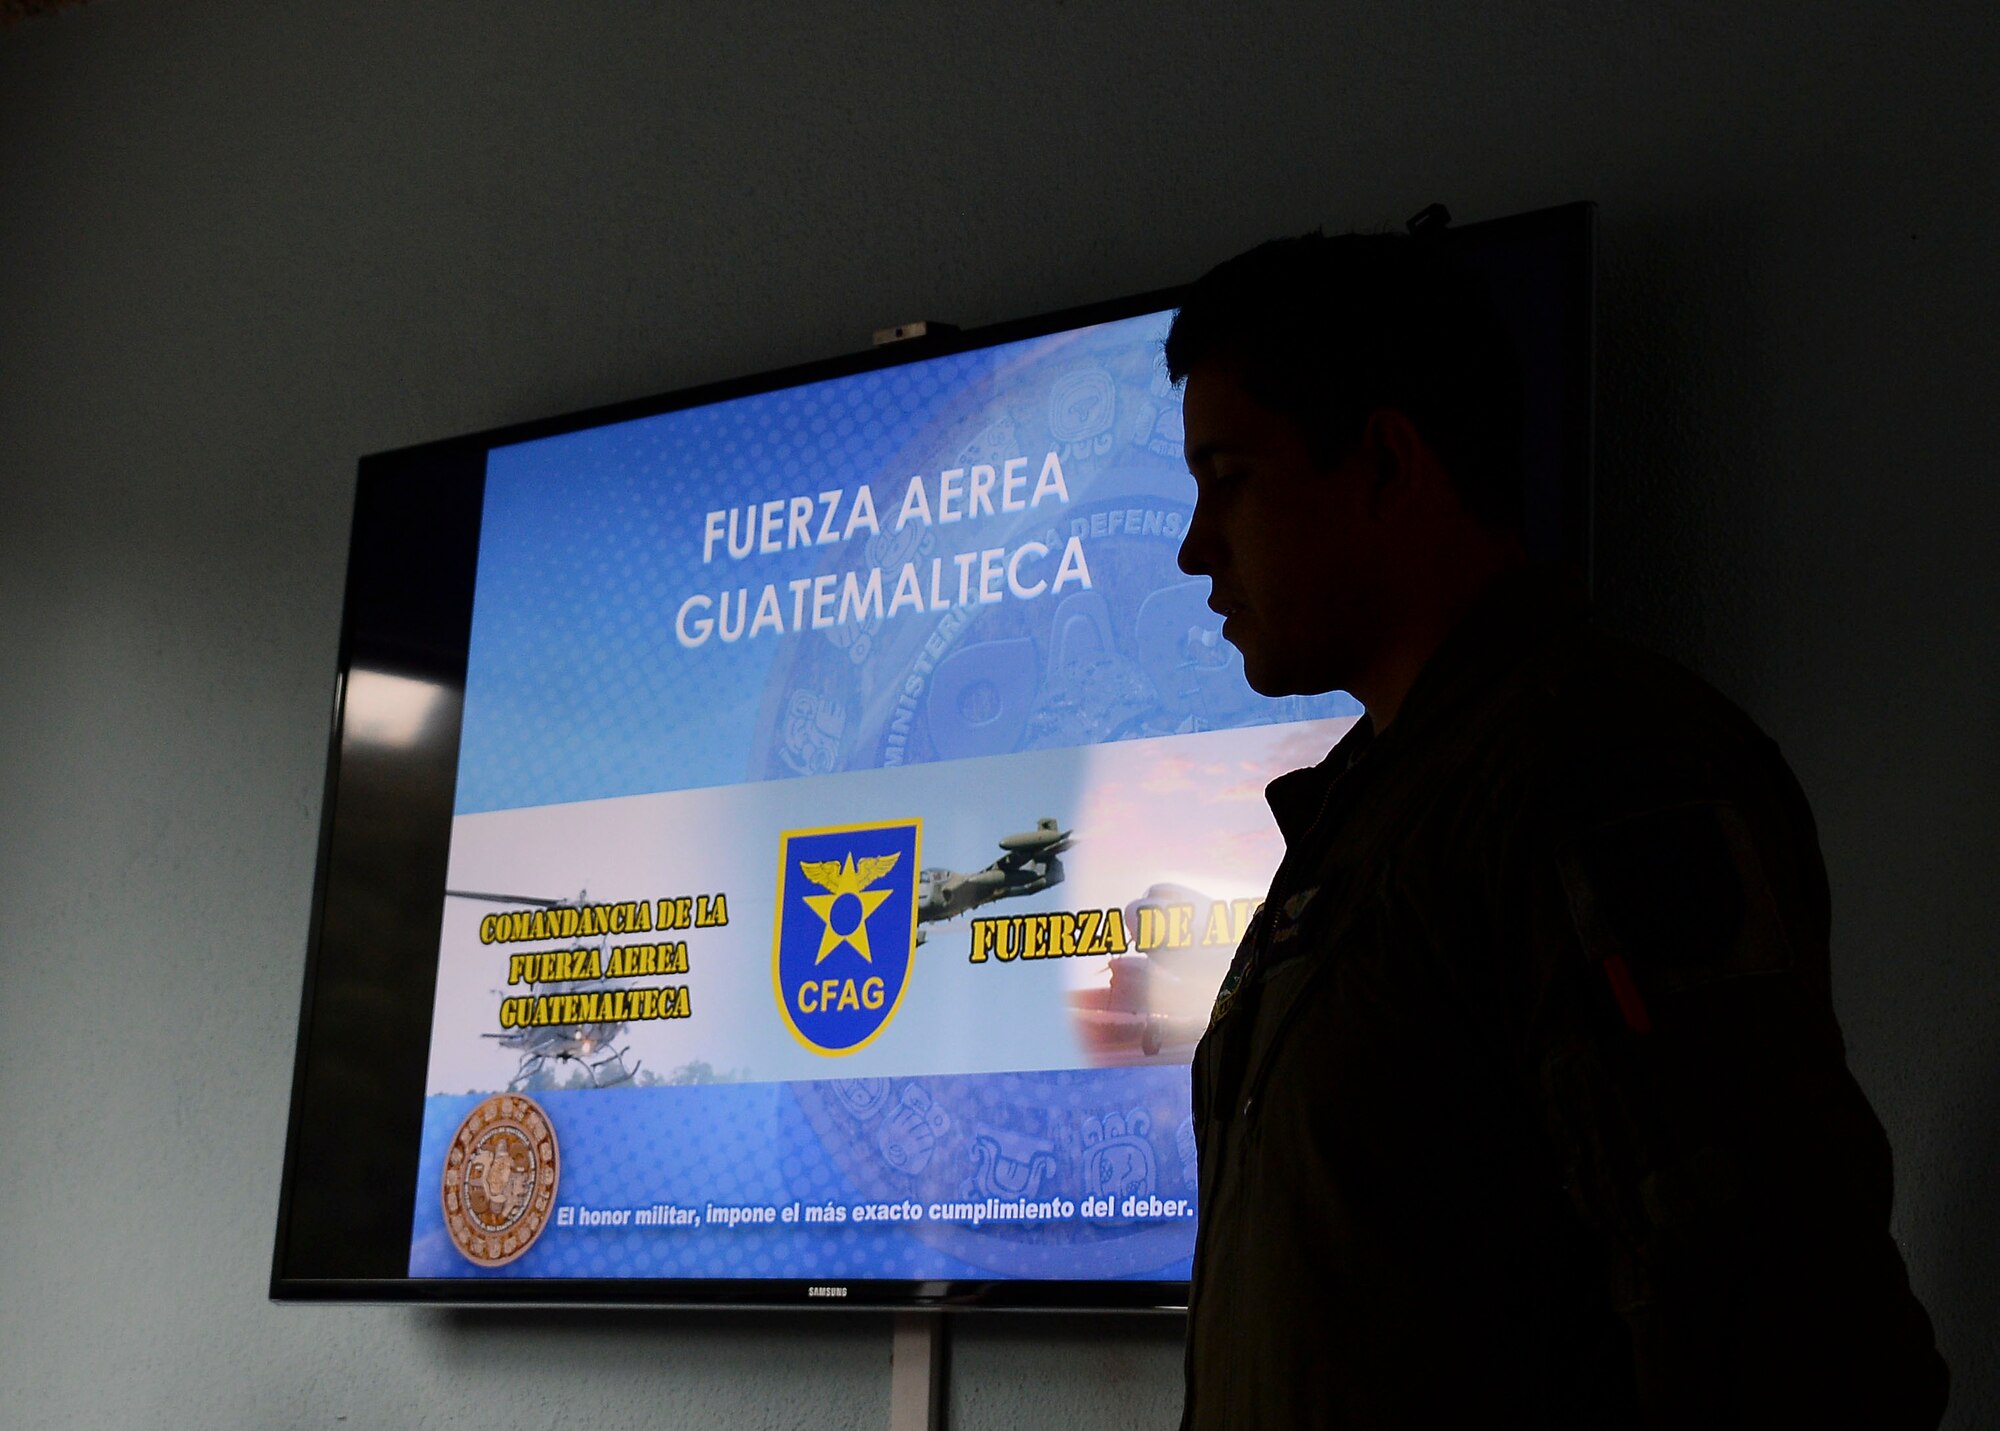 Lt. 1st Class Alejandro Godoy, pilot with the Guatemalan air force, briefs members of 12th Air Force (Air Forces Southern) and the Arkansas Air National Guard on Guatemalan aircraft during a subject matter expert exchange with the Guatemalan Military in Guatemala City, Guatemala, Aug. 5, 2014.  The briefing was used to inform the U.S. medical technicians of the Guatemalan air force’s aerospace medical capabilities. (U.S. Air Force photo by Tech. Sgt. Heather R. Redman/Released)